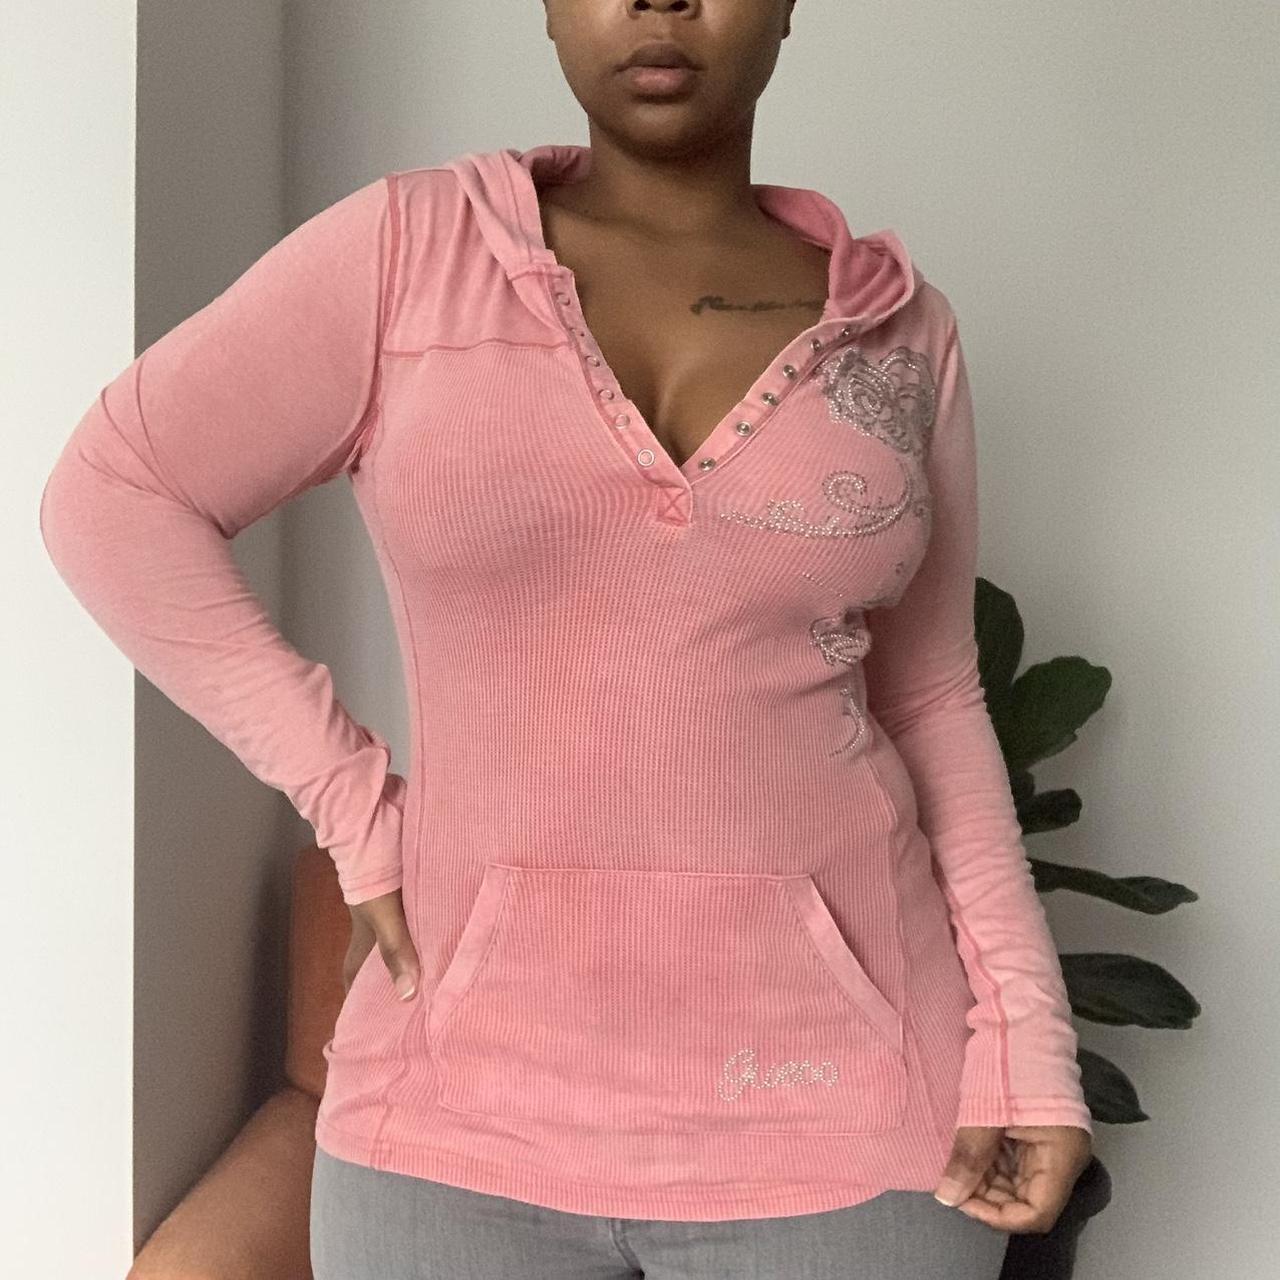 Guess Women's Pink and Silver Hoodie